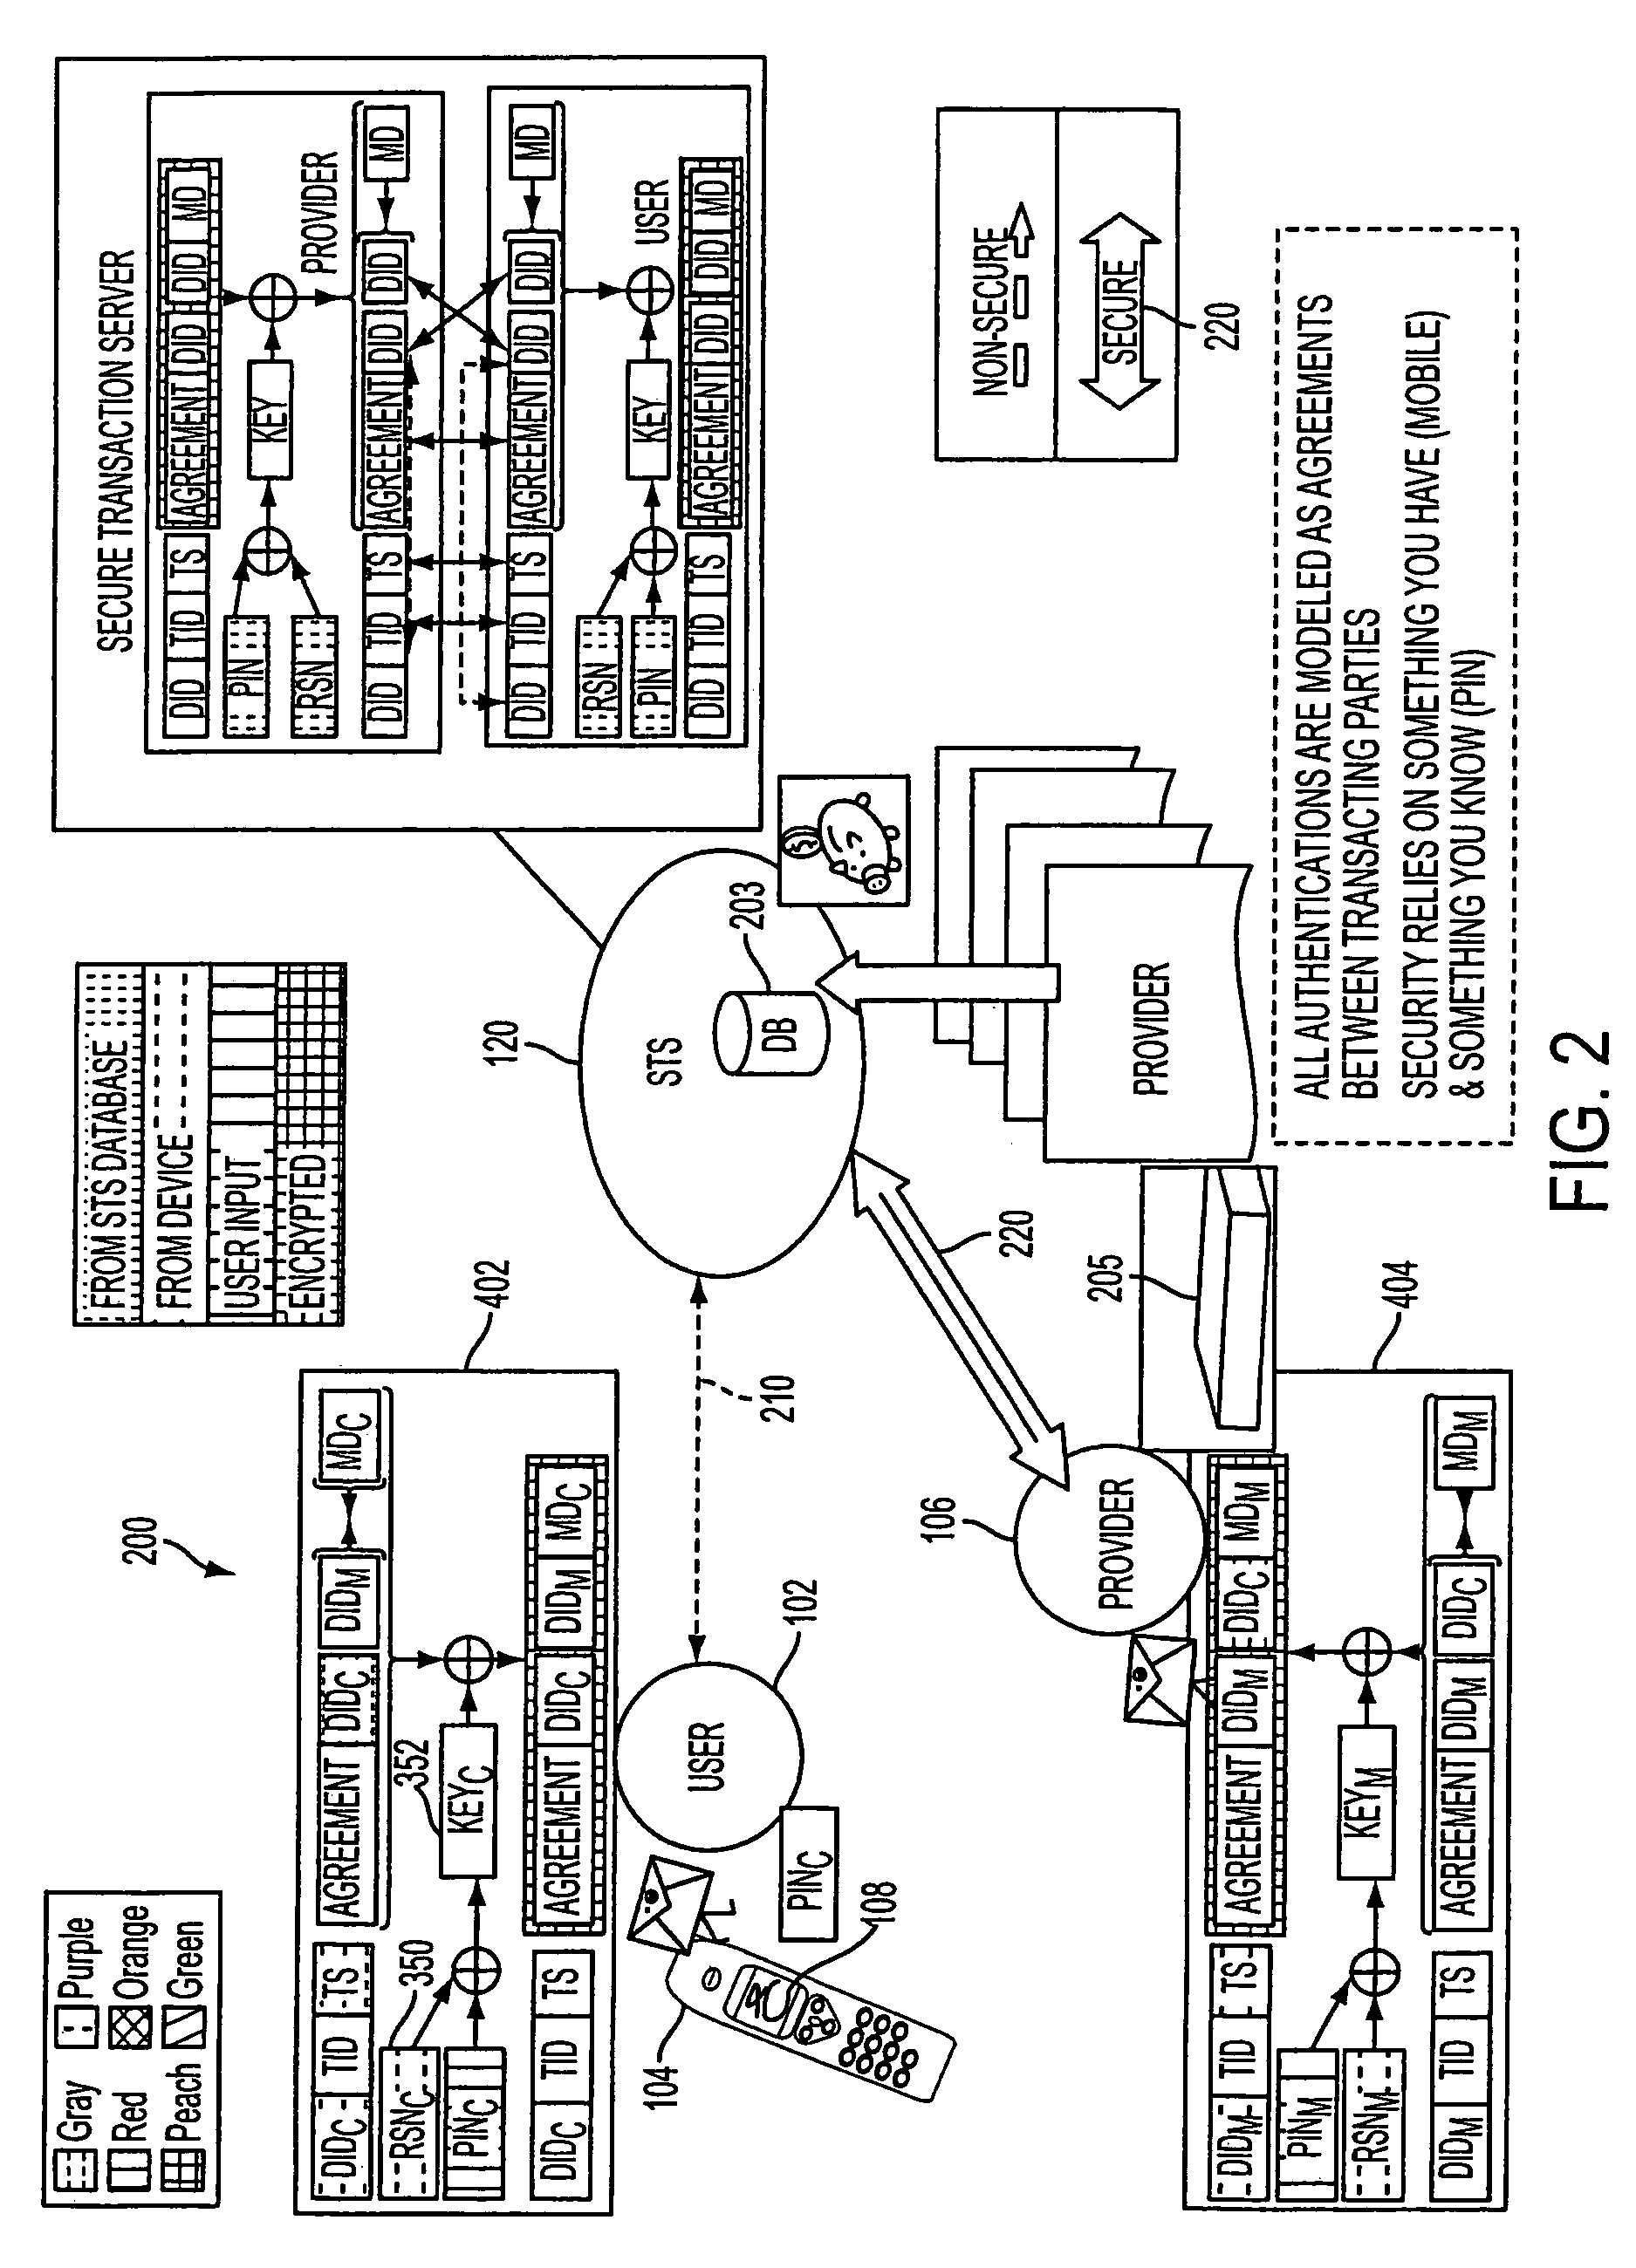 Authentication services using mobile device